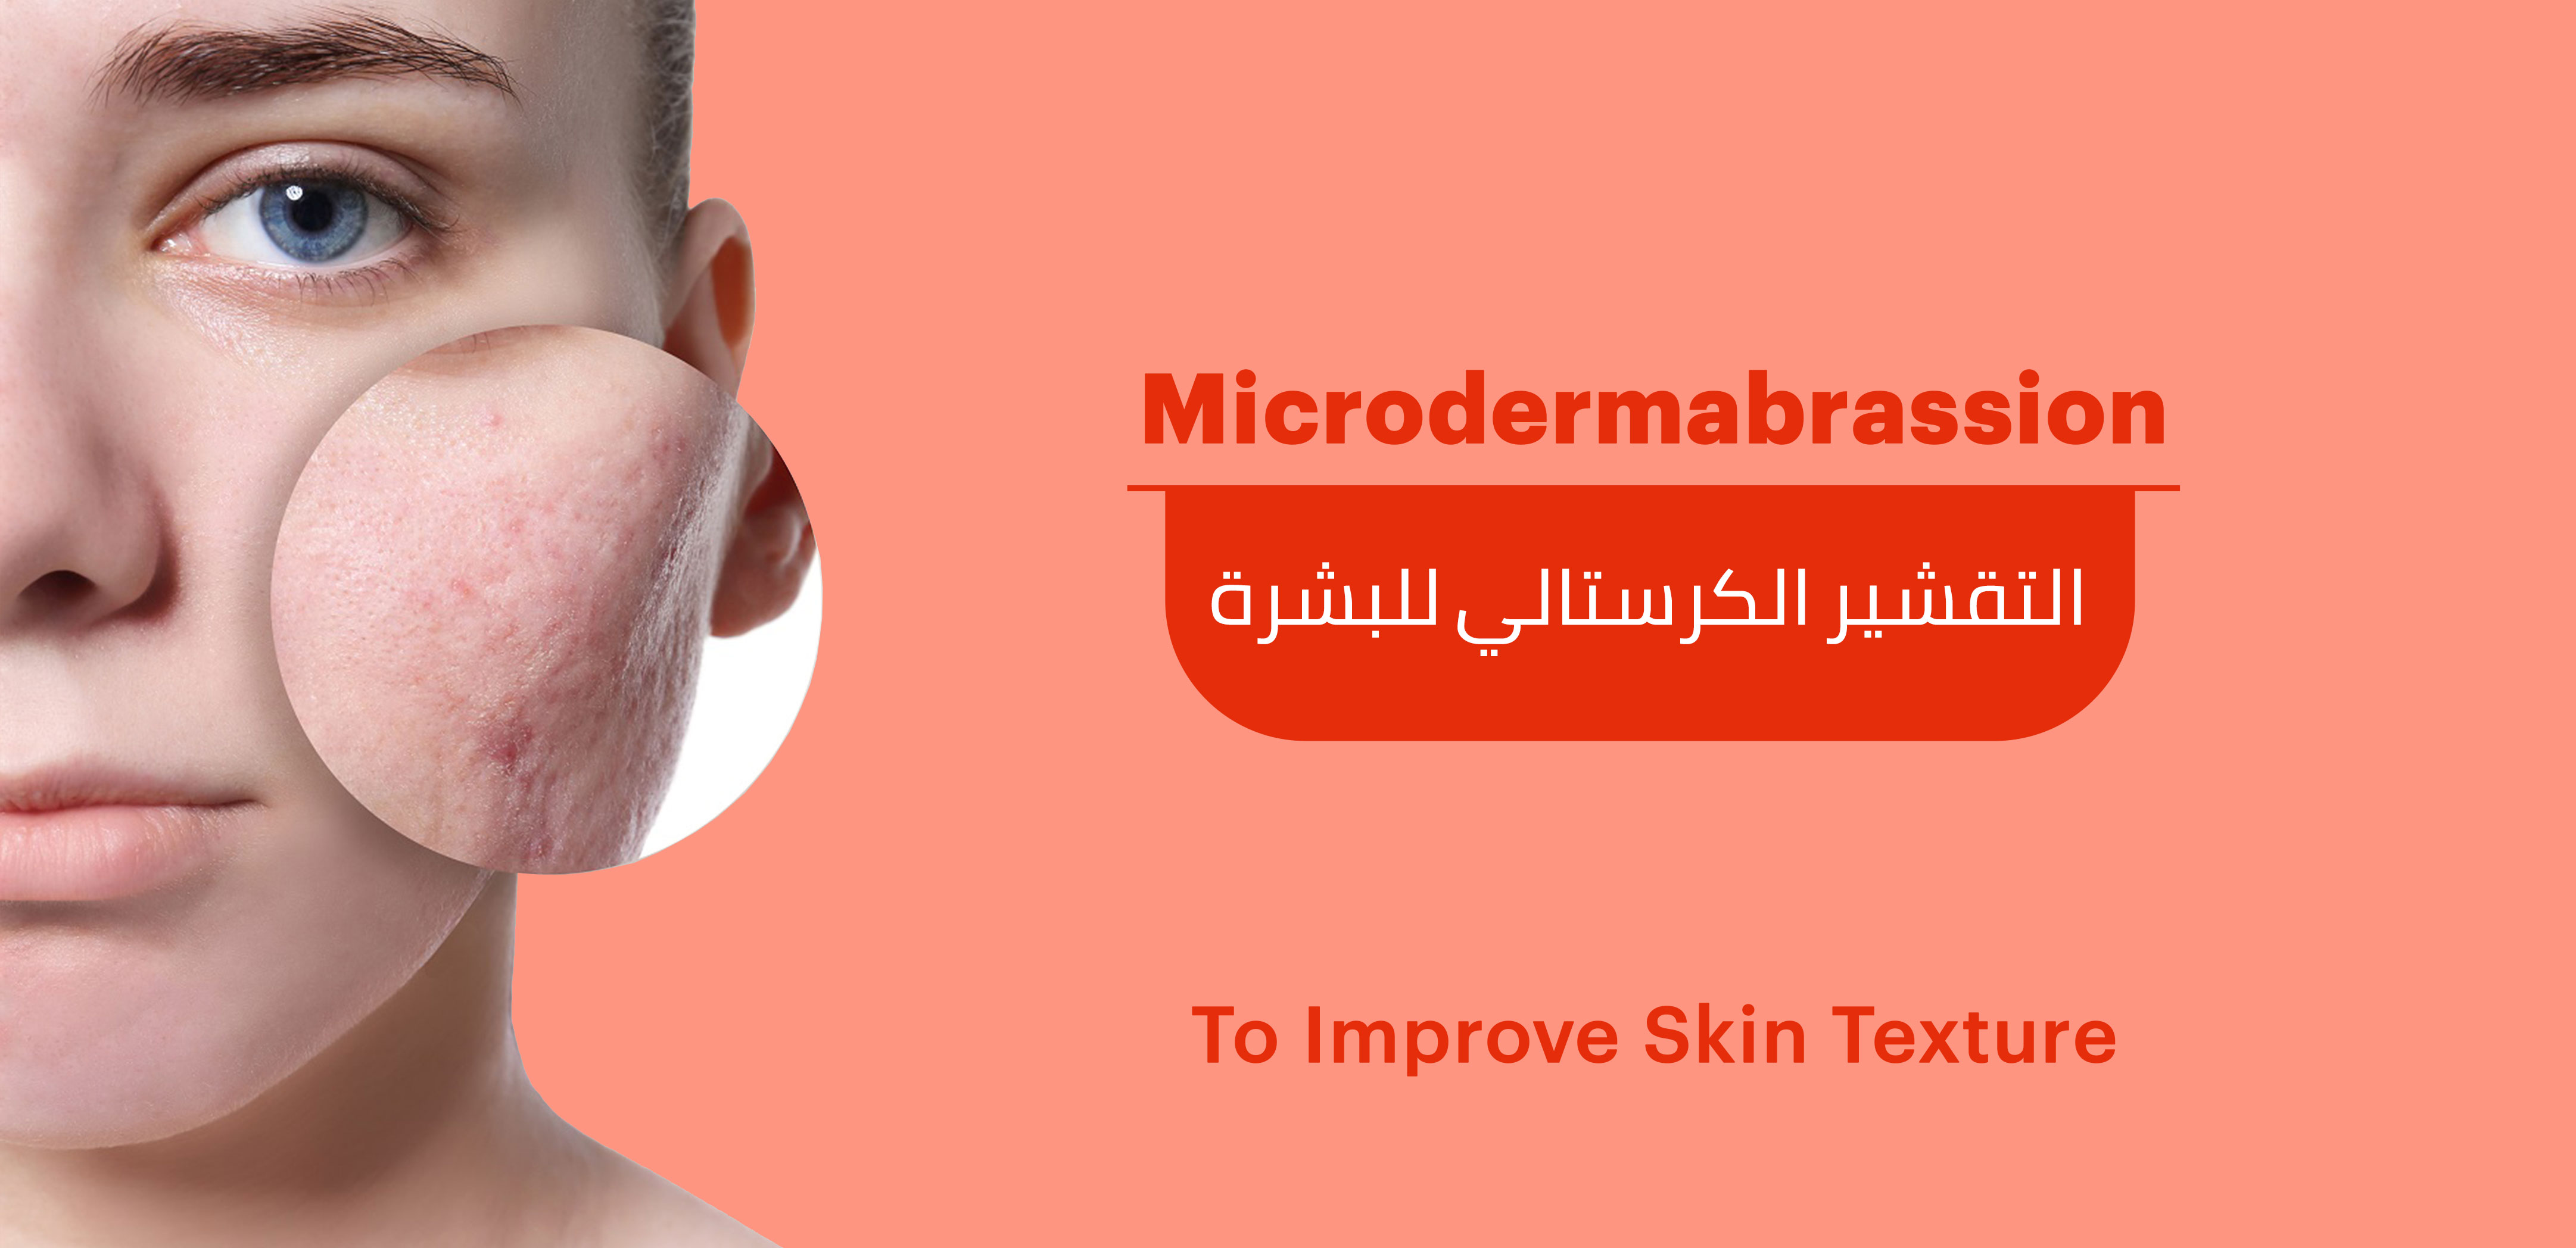 WHAT IS MICRODERMABRASION?